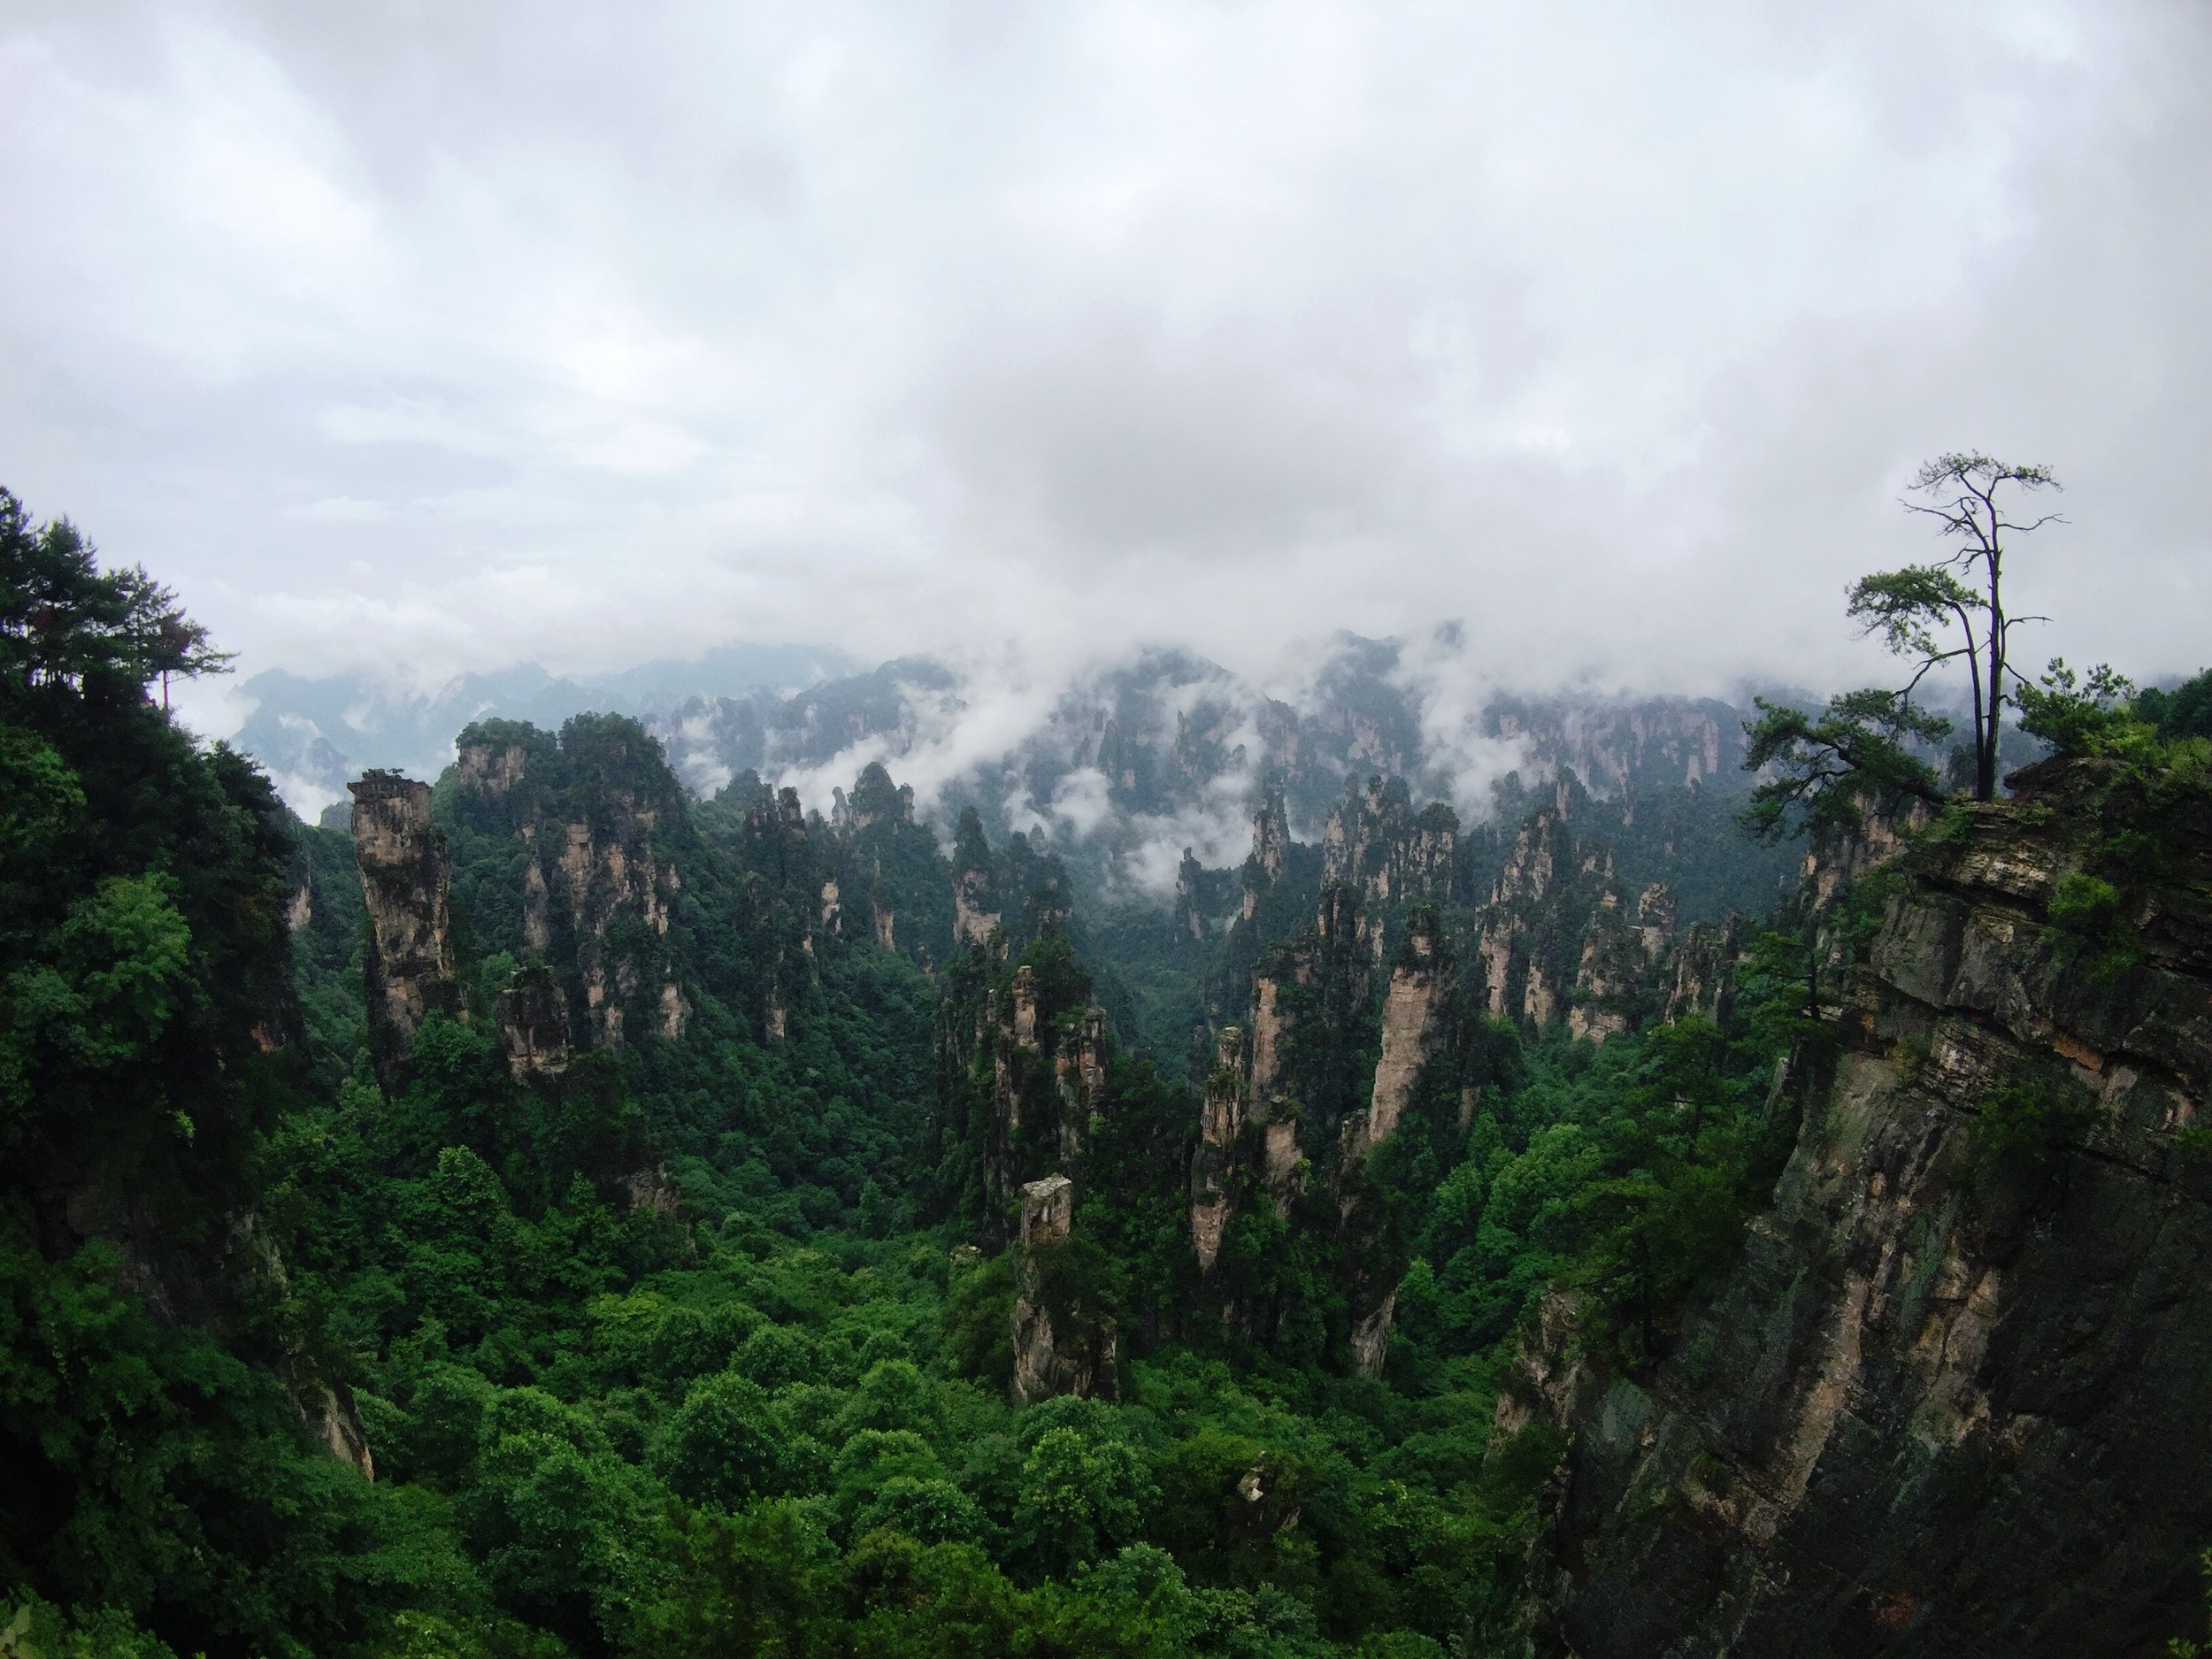 Zhangjiajie located in the northwest Hunan Province contains some of China's most spectacular landforms, streams and forest areas. The area became famous after the release of James Cameron's box office hit Avatar, in which the Hallelujah Mountains w…